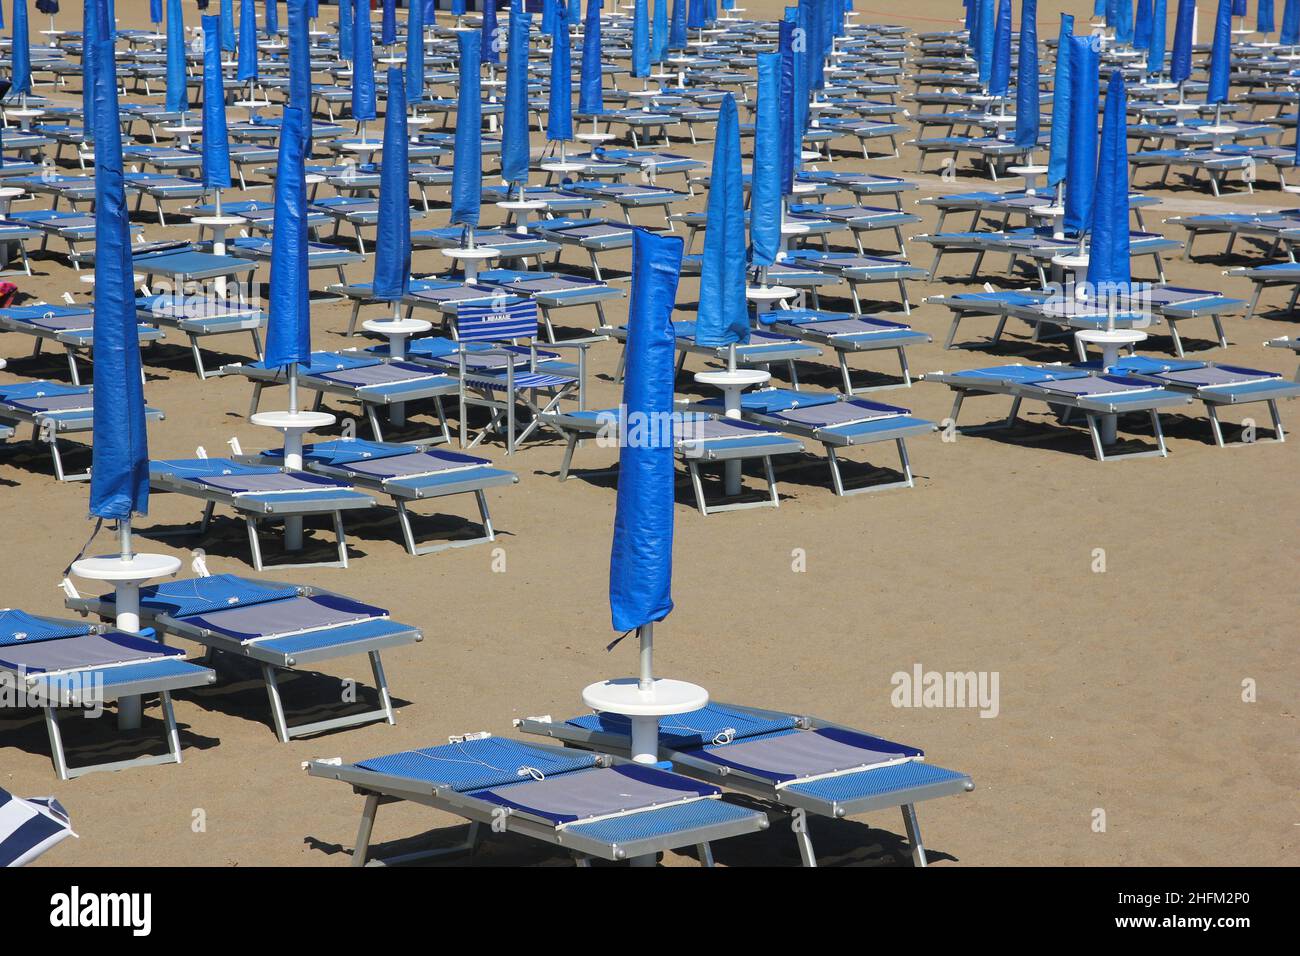 The detail of the beach loungers on the empty sandy beach. Showing lack of tourists and missing incomes for the hotels. Stock Photo